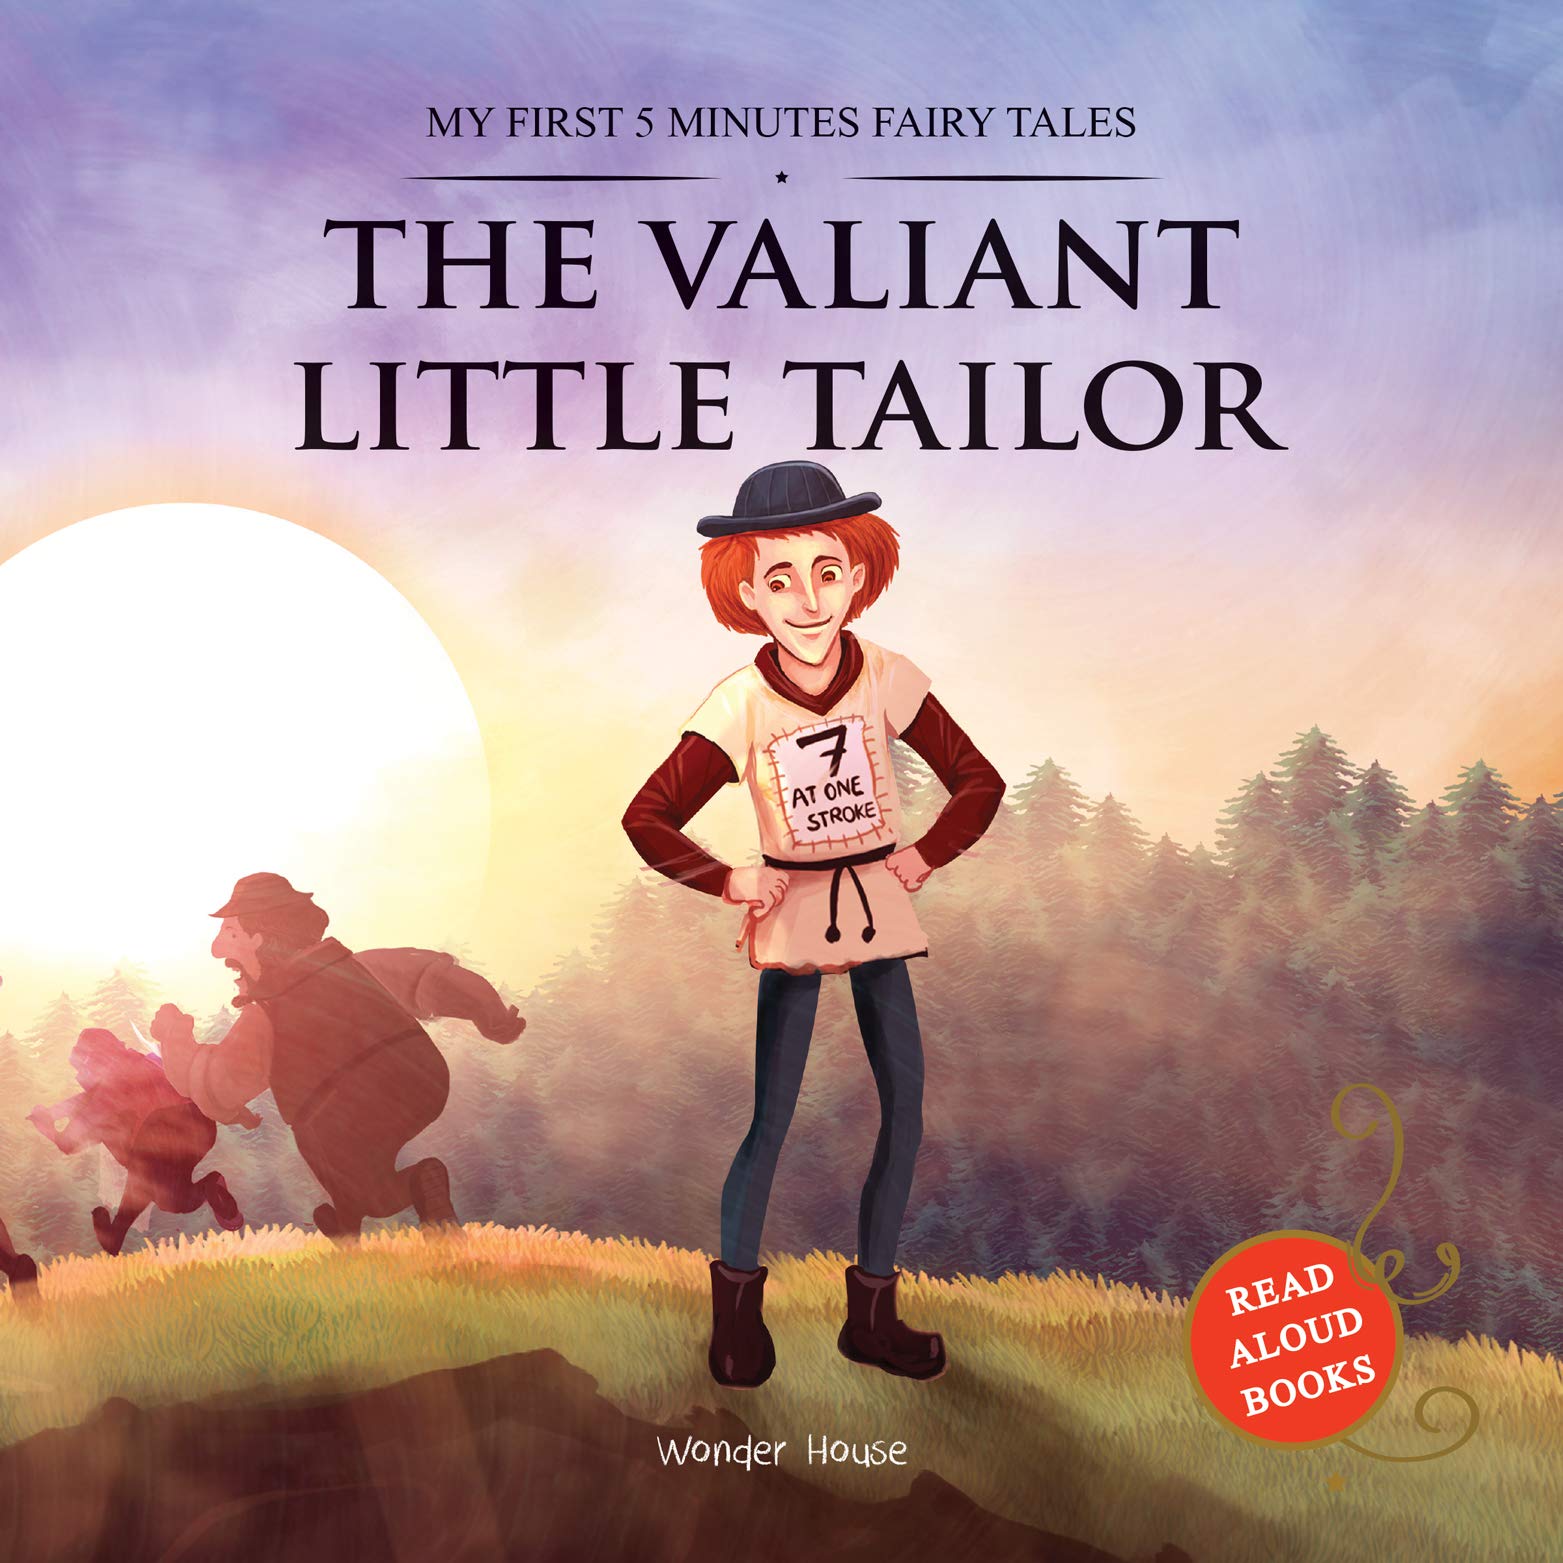 My First 5 Minutes Fairy Tales: The Valliant Little Tailor